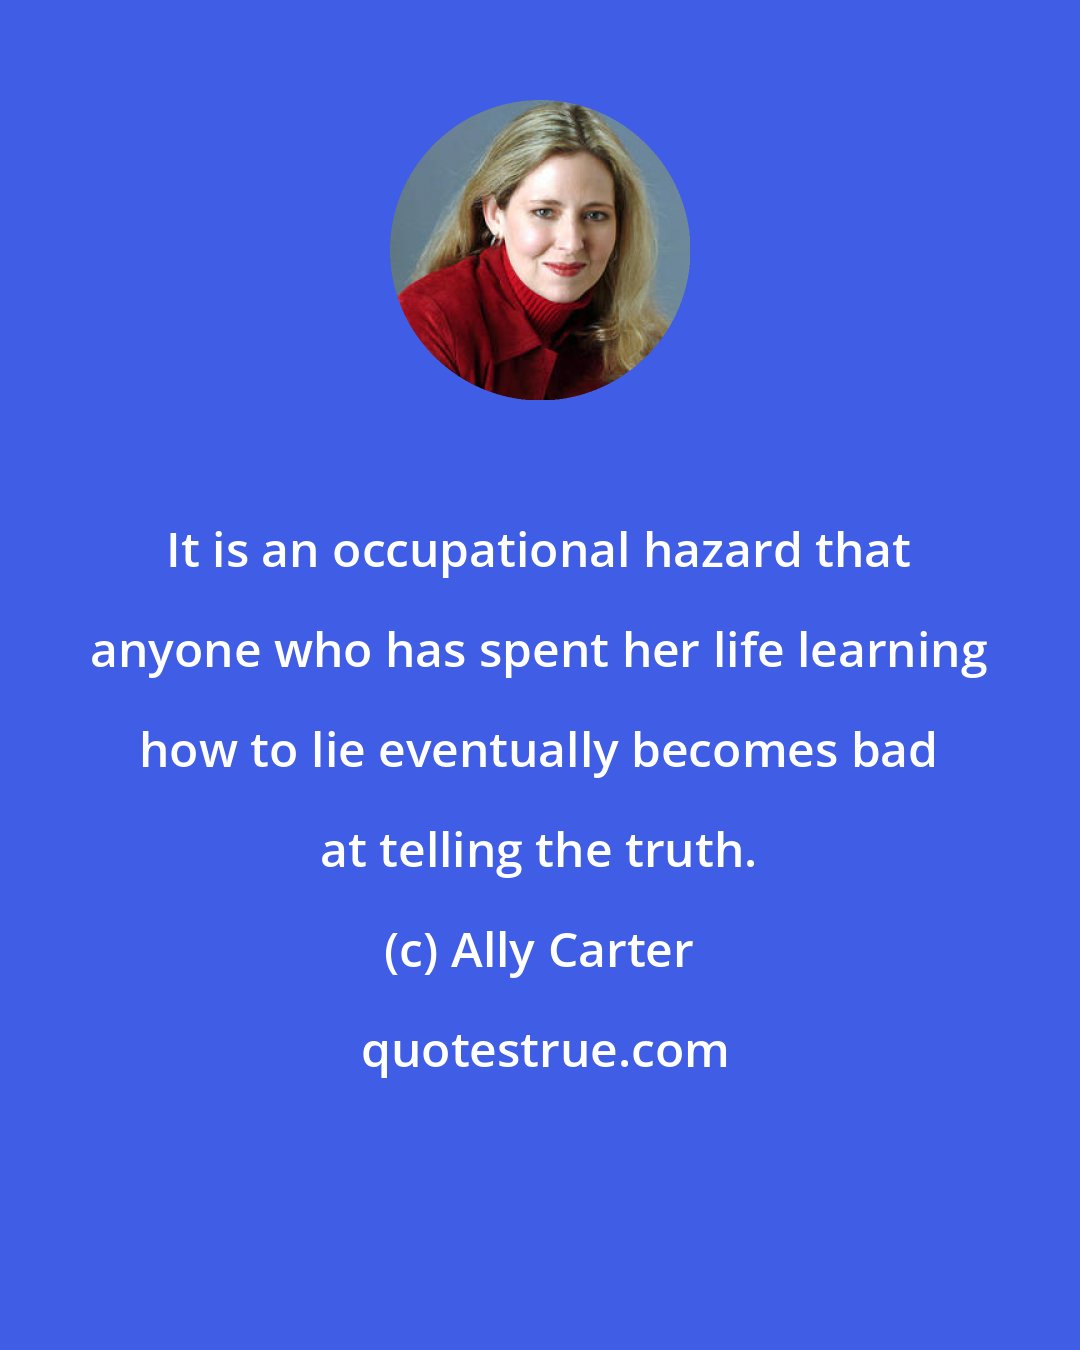 Ally Carter: It is an occupational hazard that anyone who has spent her life learning how to lie eventually becomes bad at telling the truth.